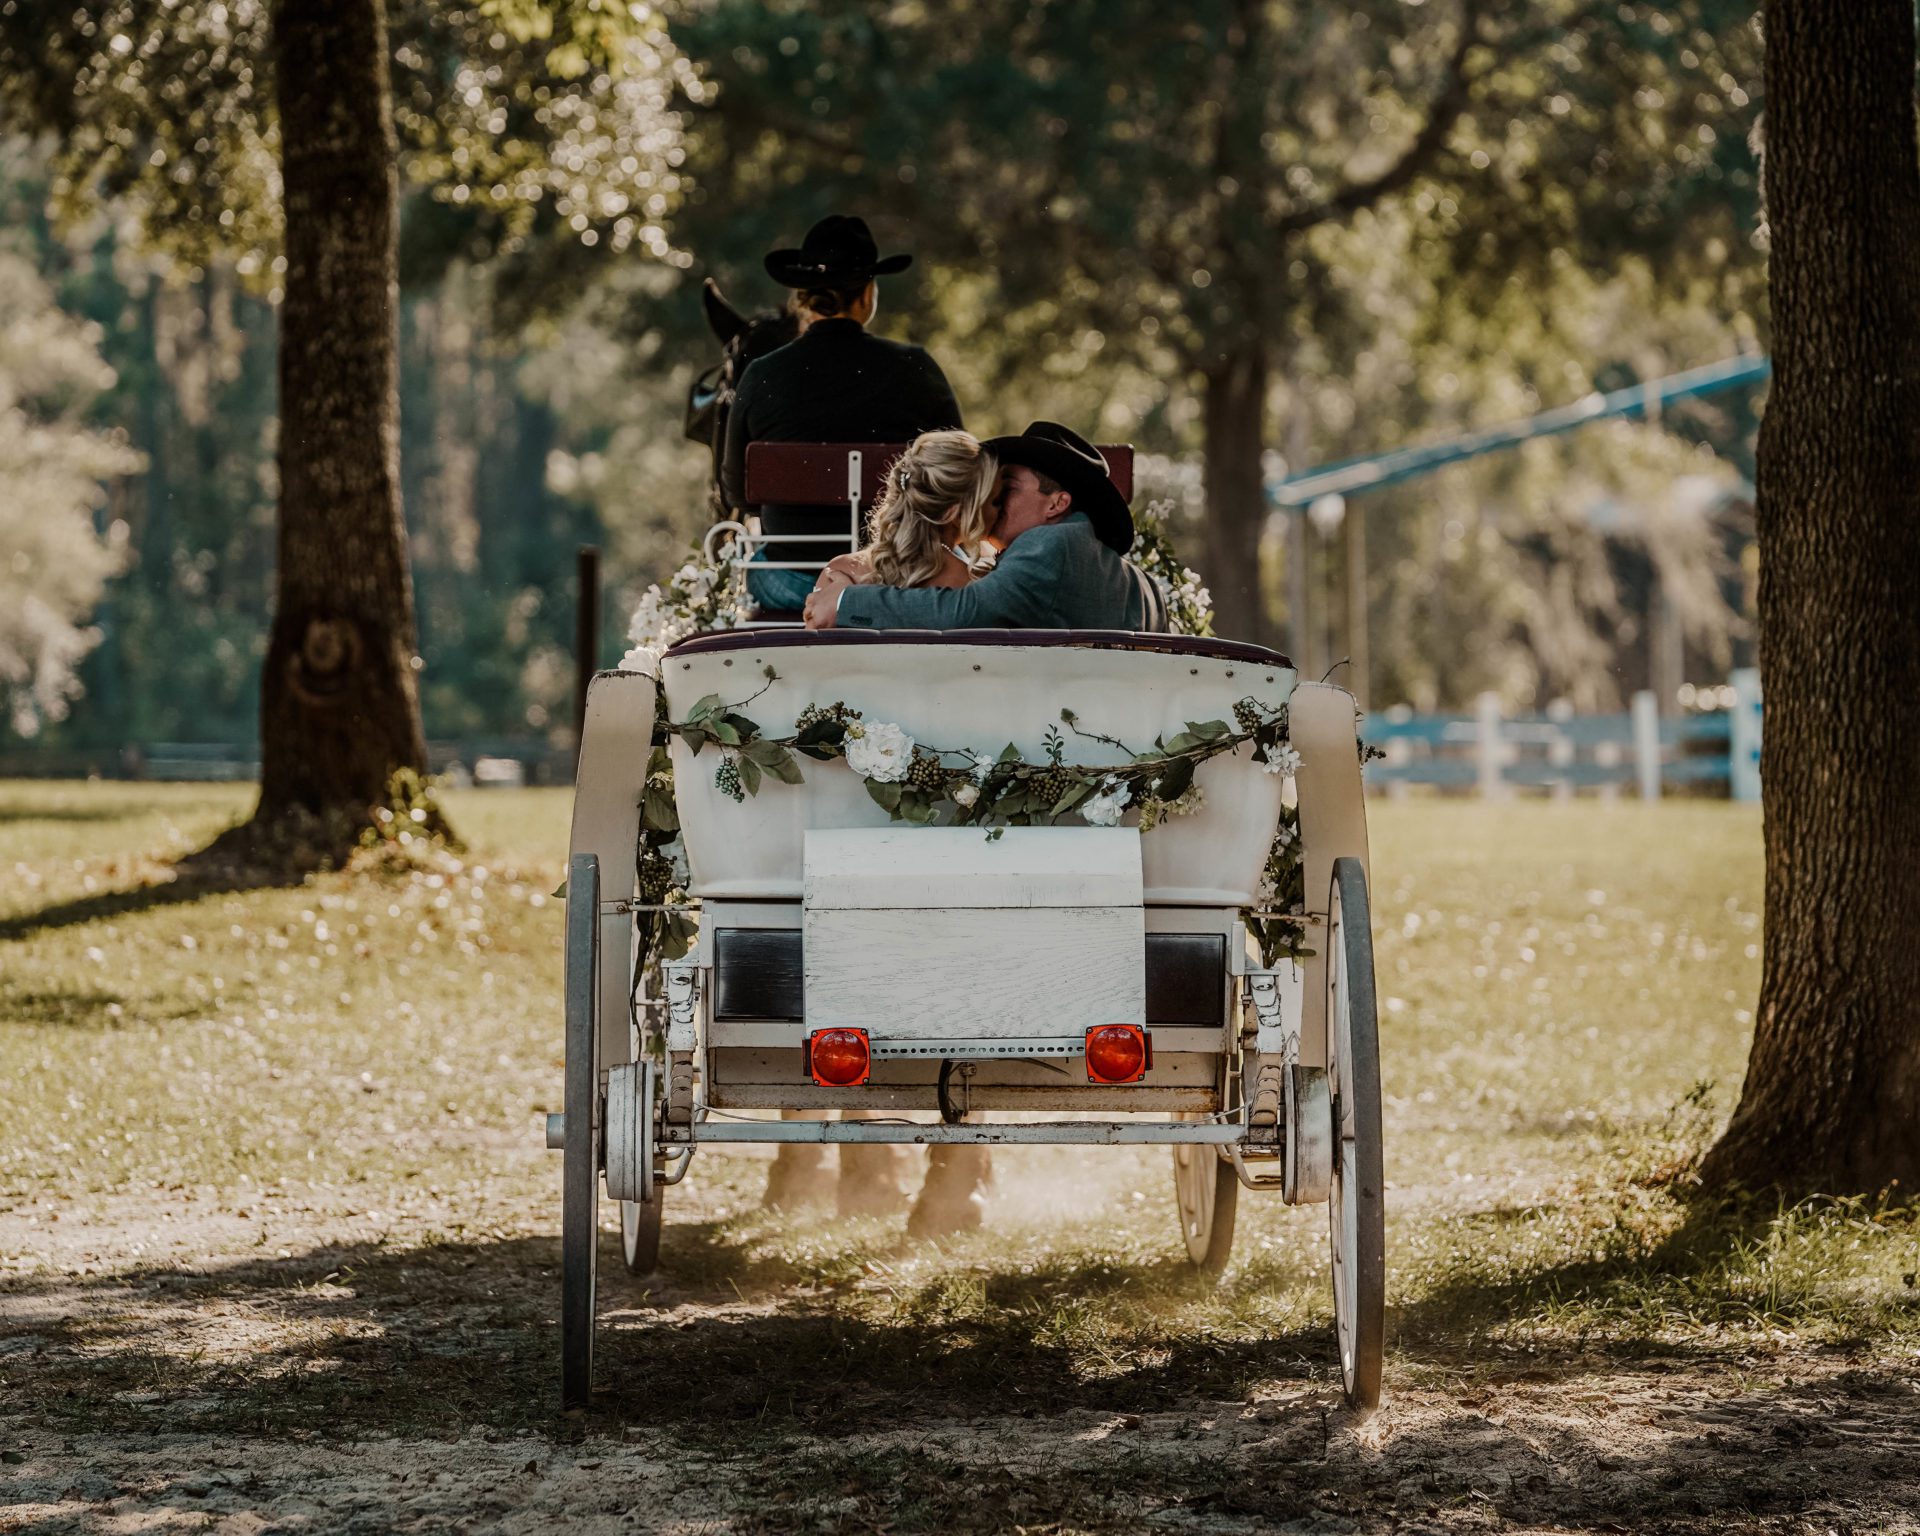 Photo of bride and groom exiting the ceremony via horse and carriage.